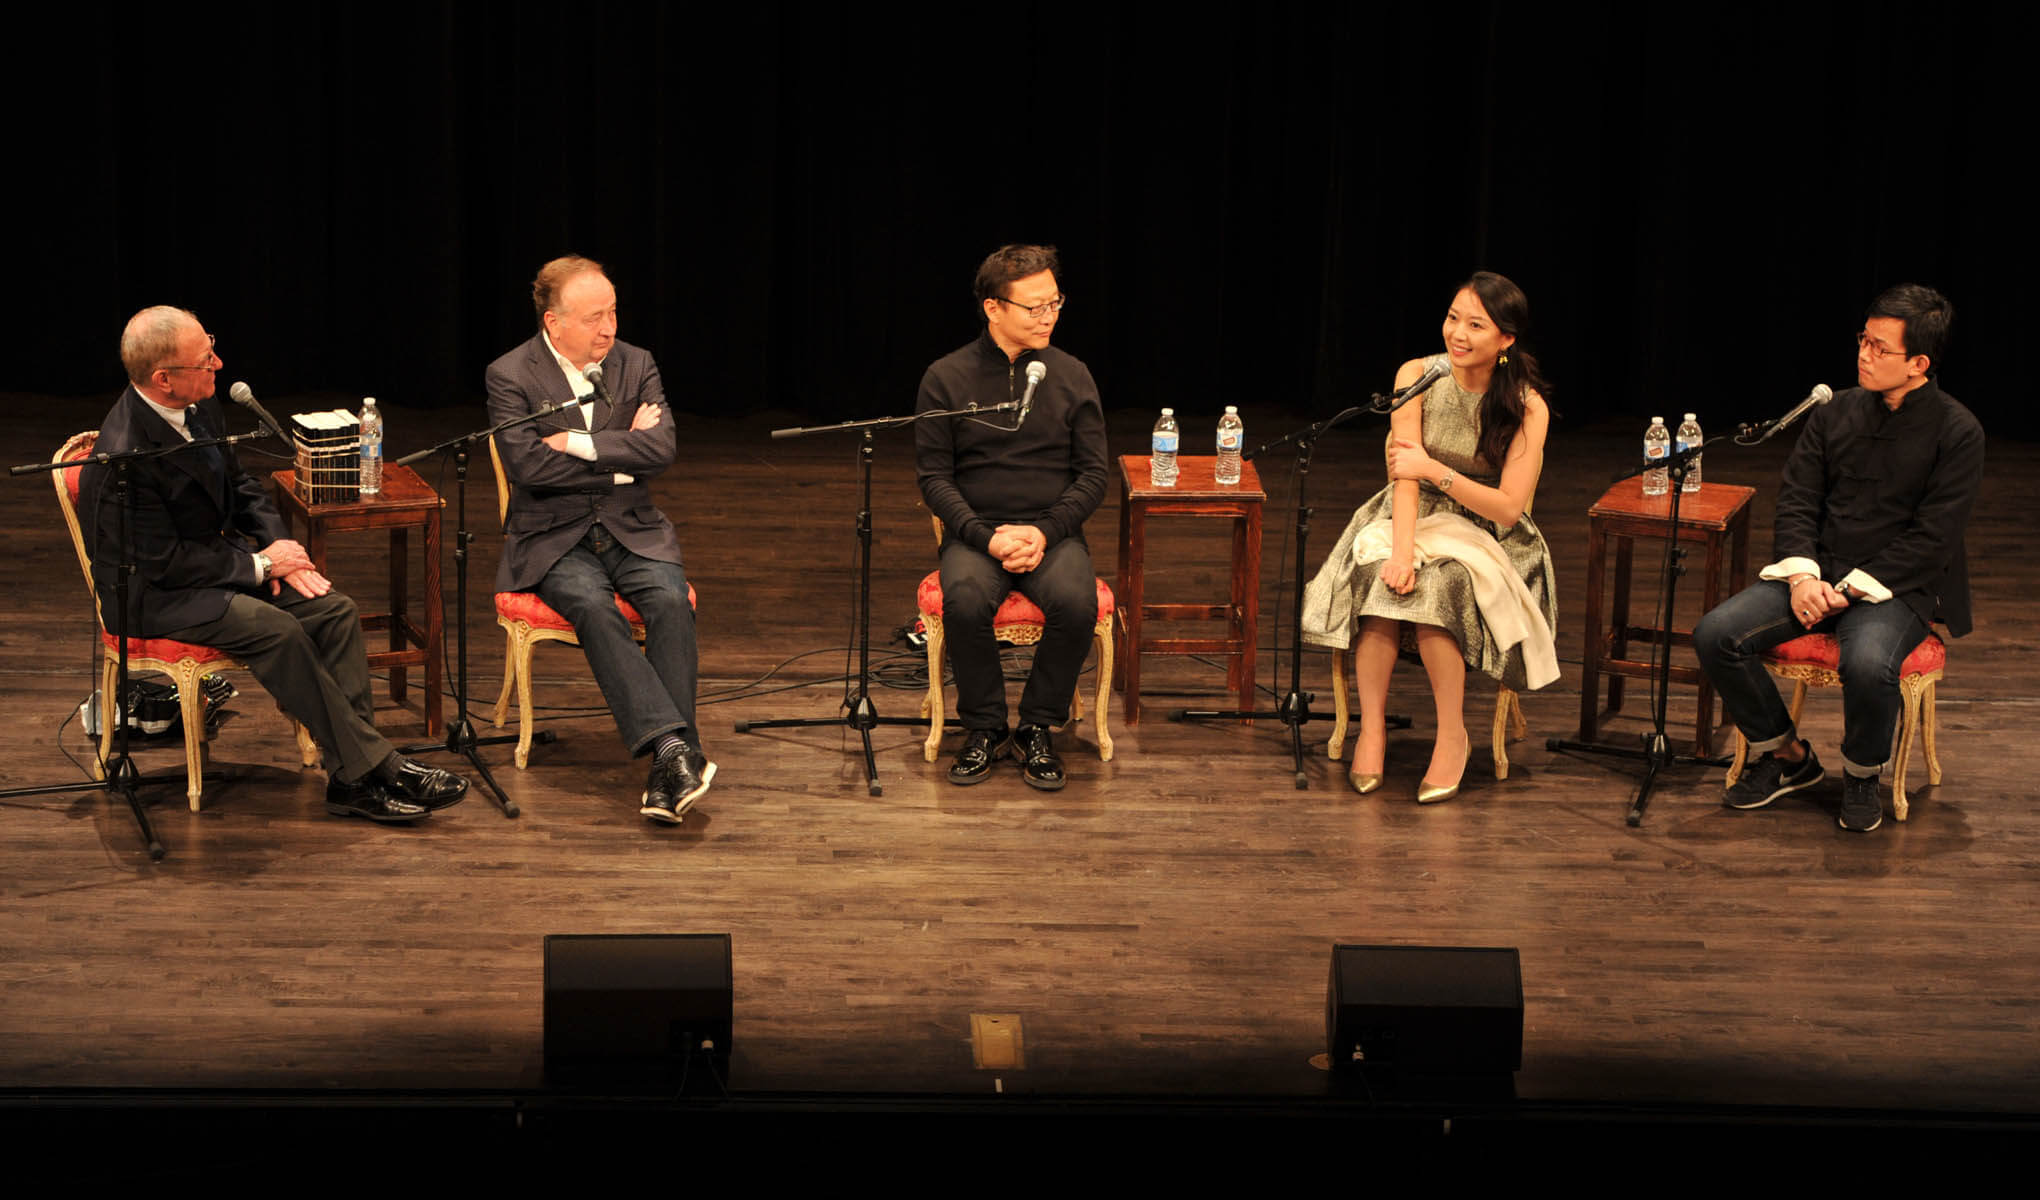 5 people sitting around having a discussion on a stage.